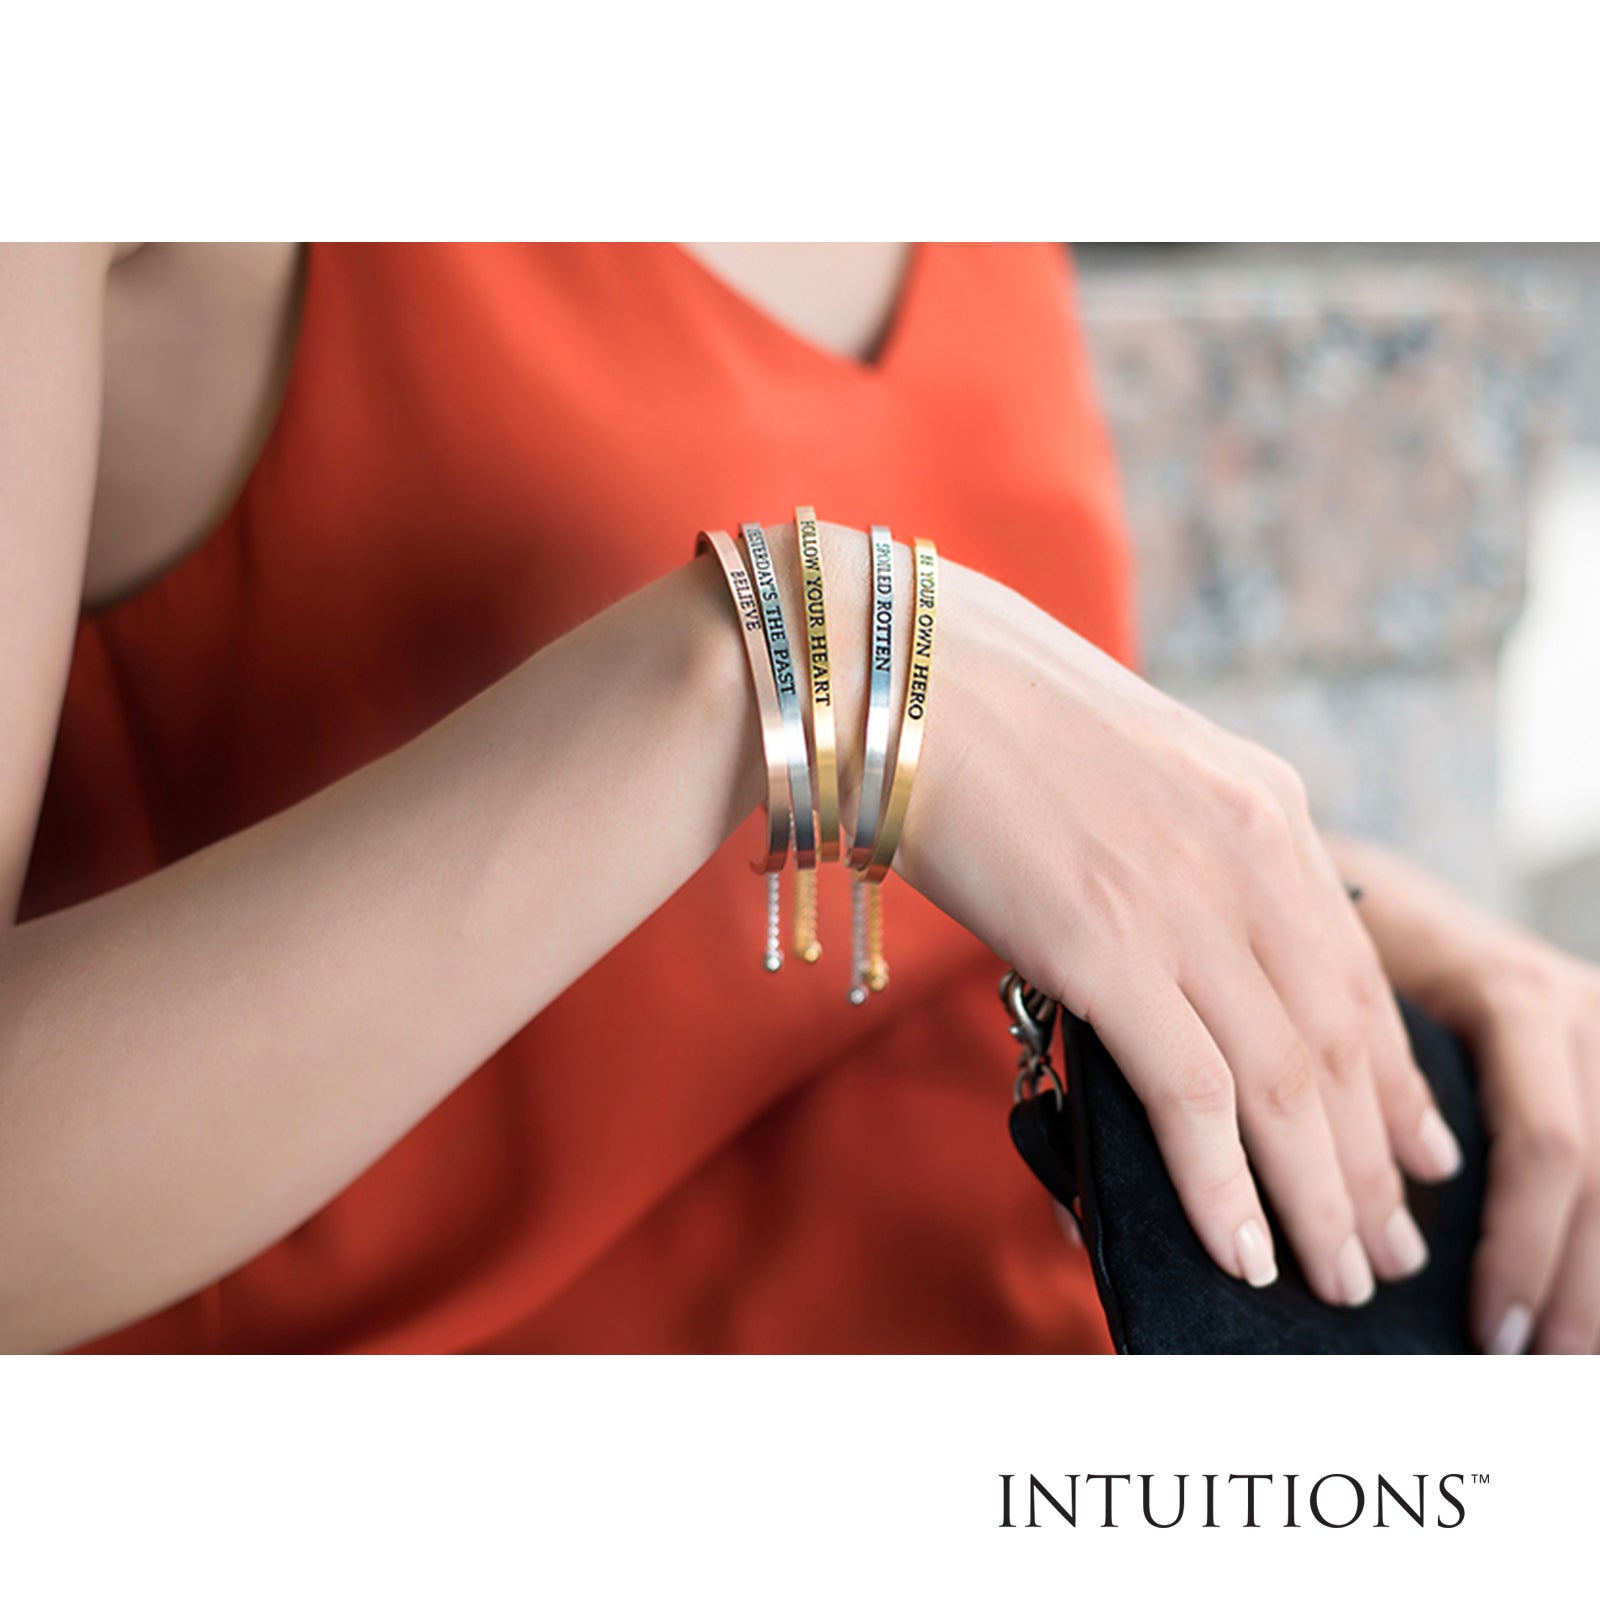 Intuitions Stainless Steel LIFE IS SHORT.SMILE. Diamond Accent Cuff Bangle Bracelet